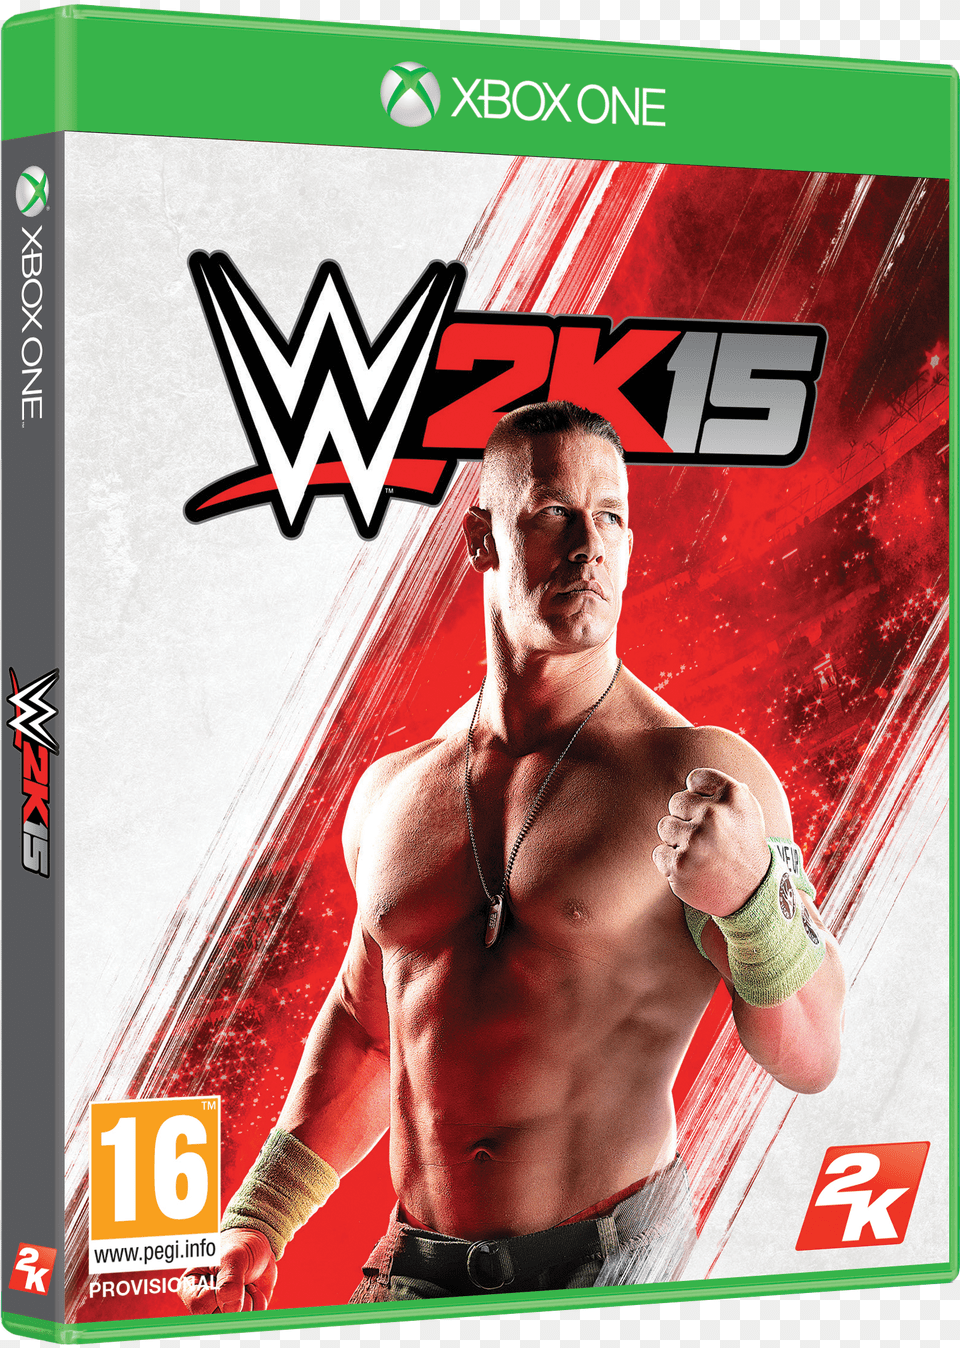 Wwe 2k15 Ps4 Fob Art Eng Wwe 2k15 Xbox One 3d Eng Wwe 2k15 Xbox One Png Image